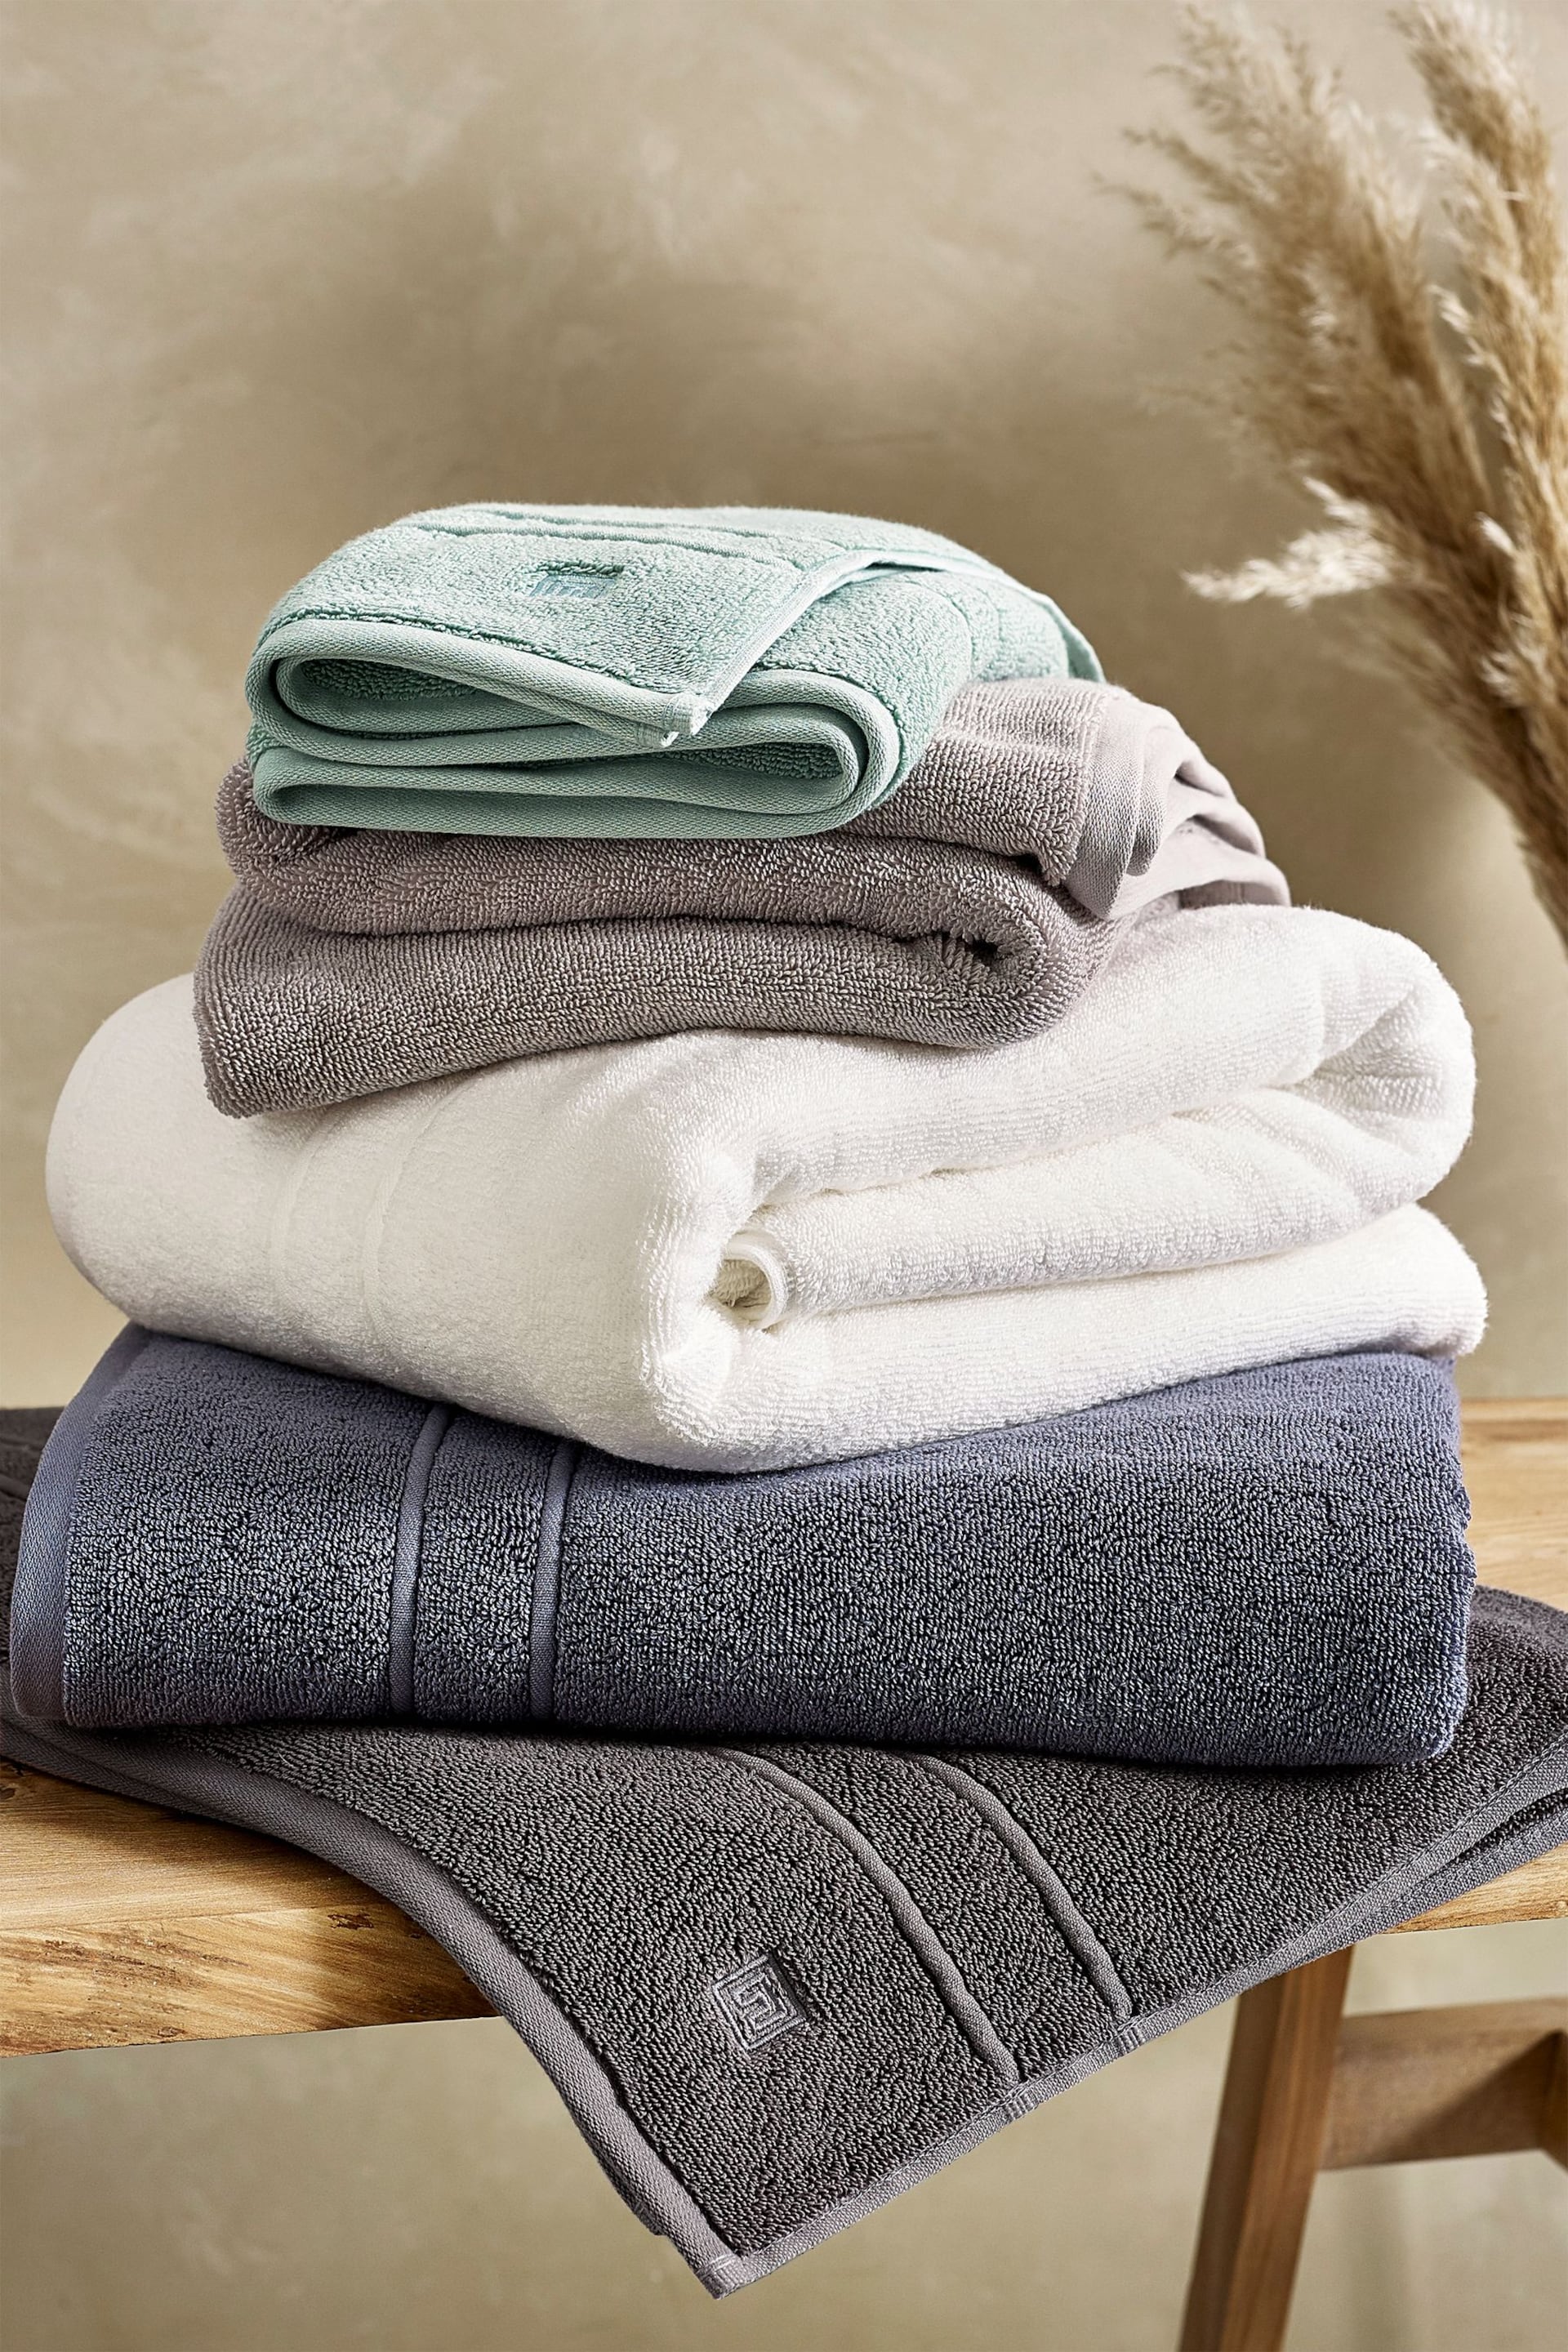 Natural Supersoft Towels 100% Cotton - Image 4 of 4